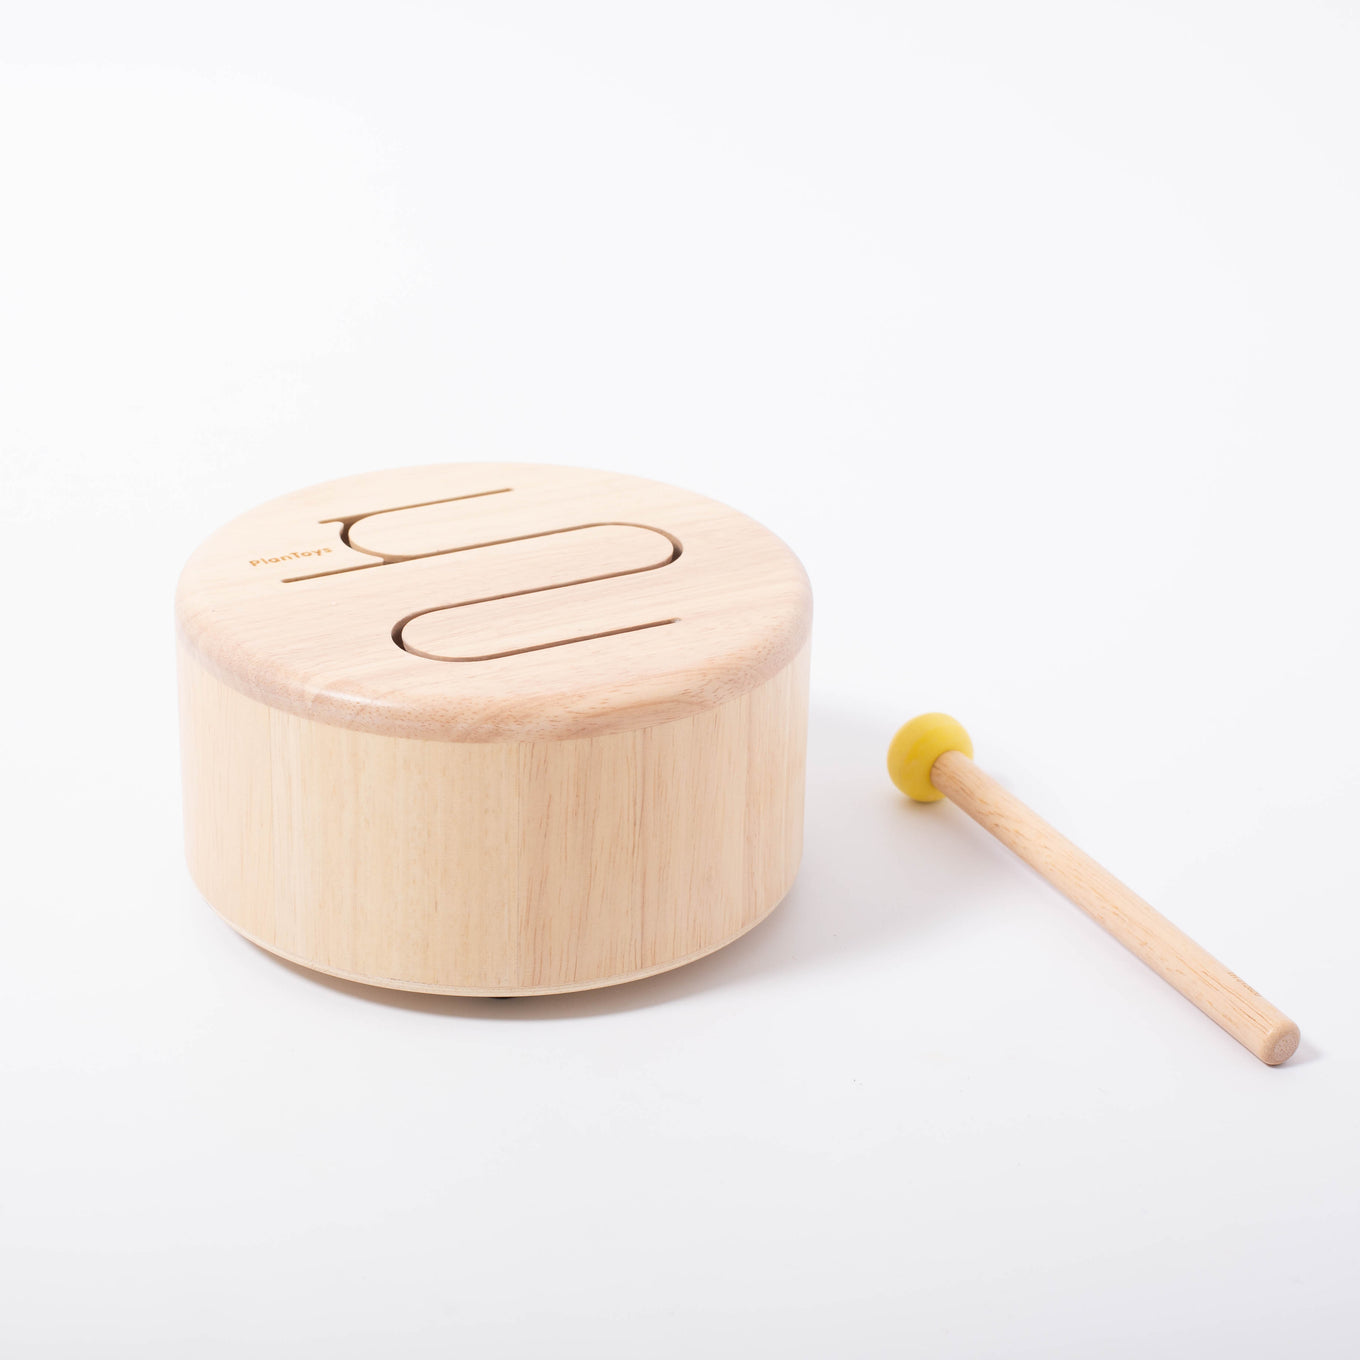 solid drum by plan toys